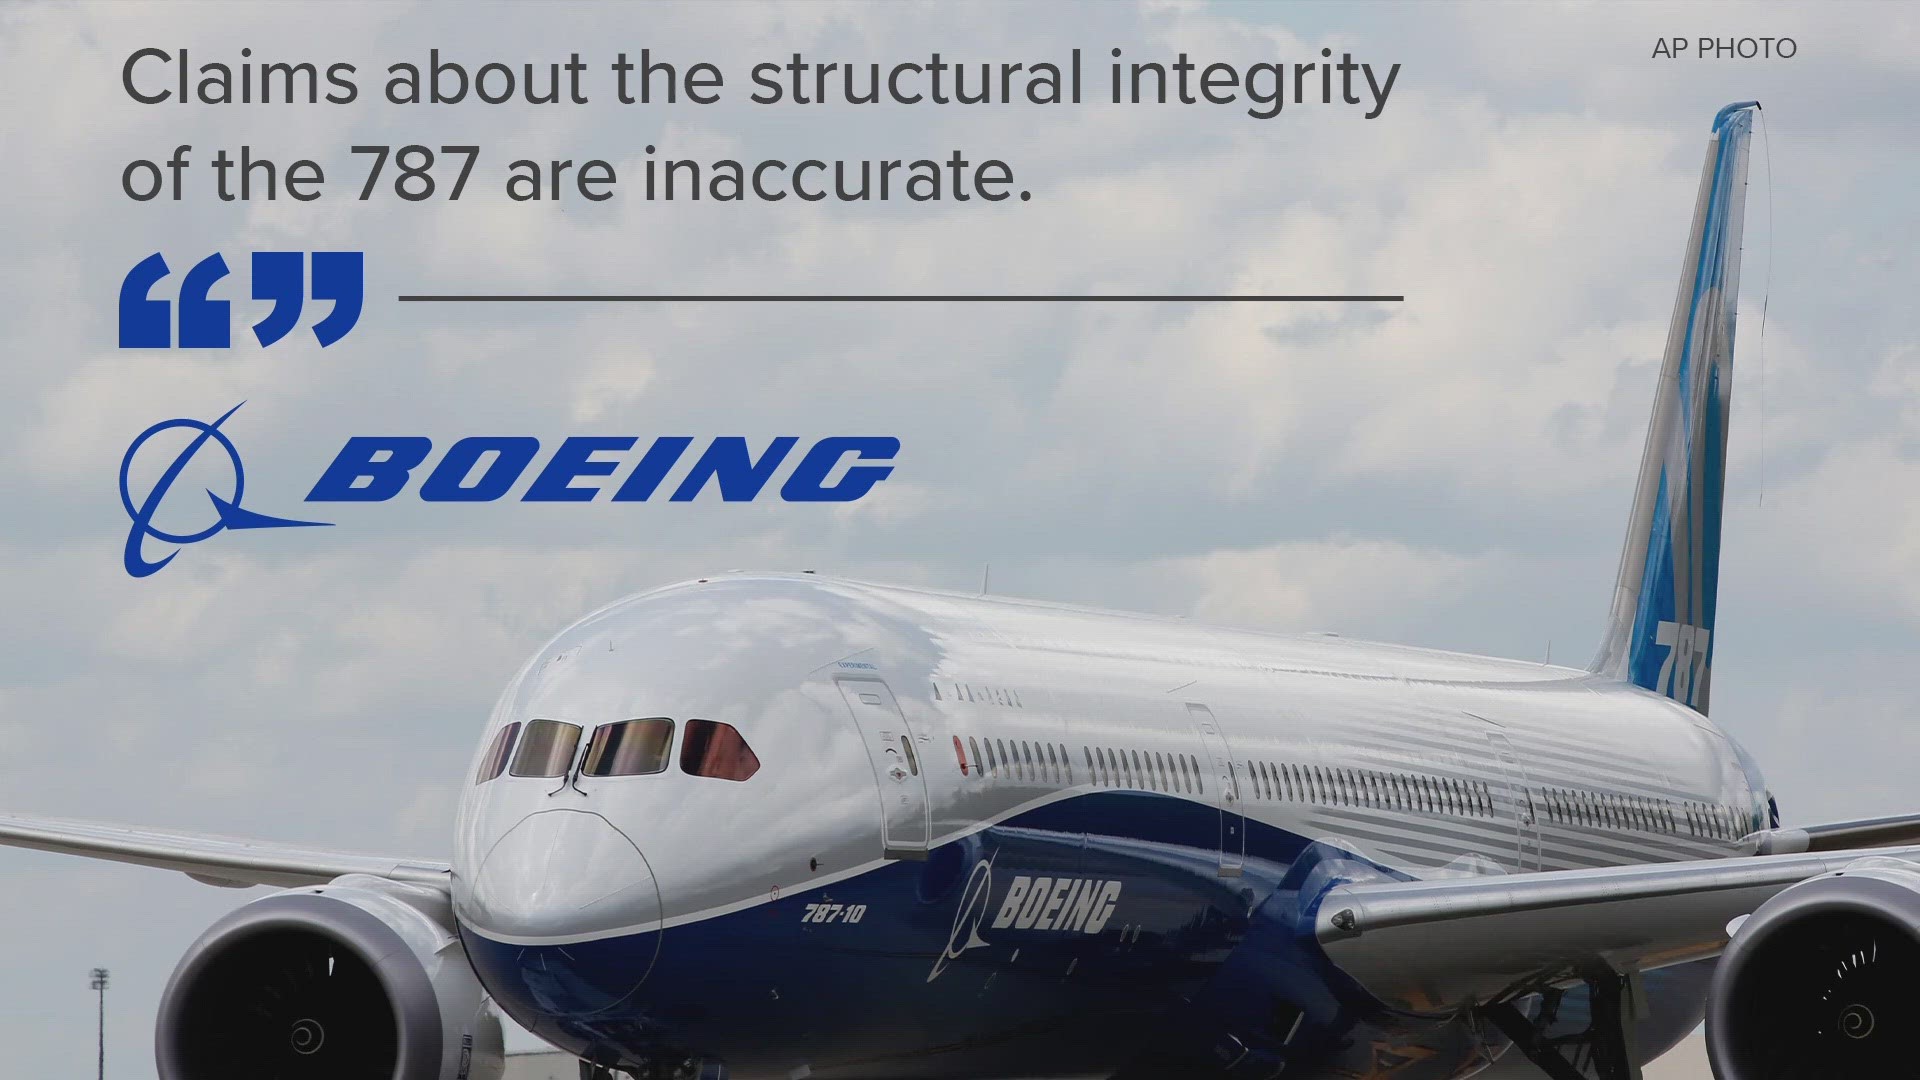 CNN says a Boeing engineer accused the company of taking manufacturing shortcuts on its 777 and 787 Dreamliner jets.